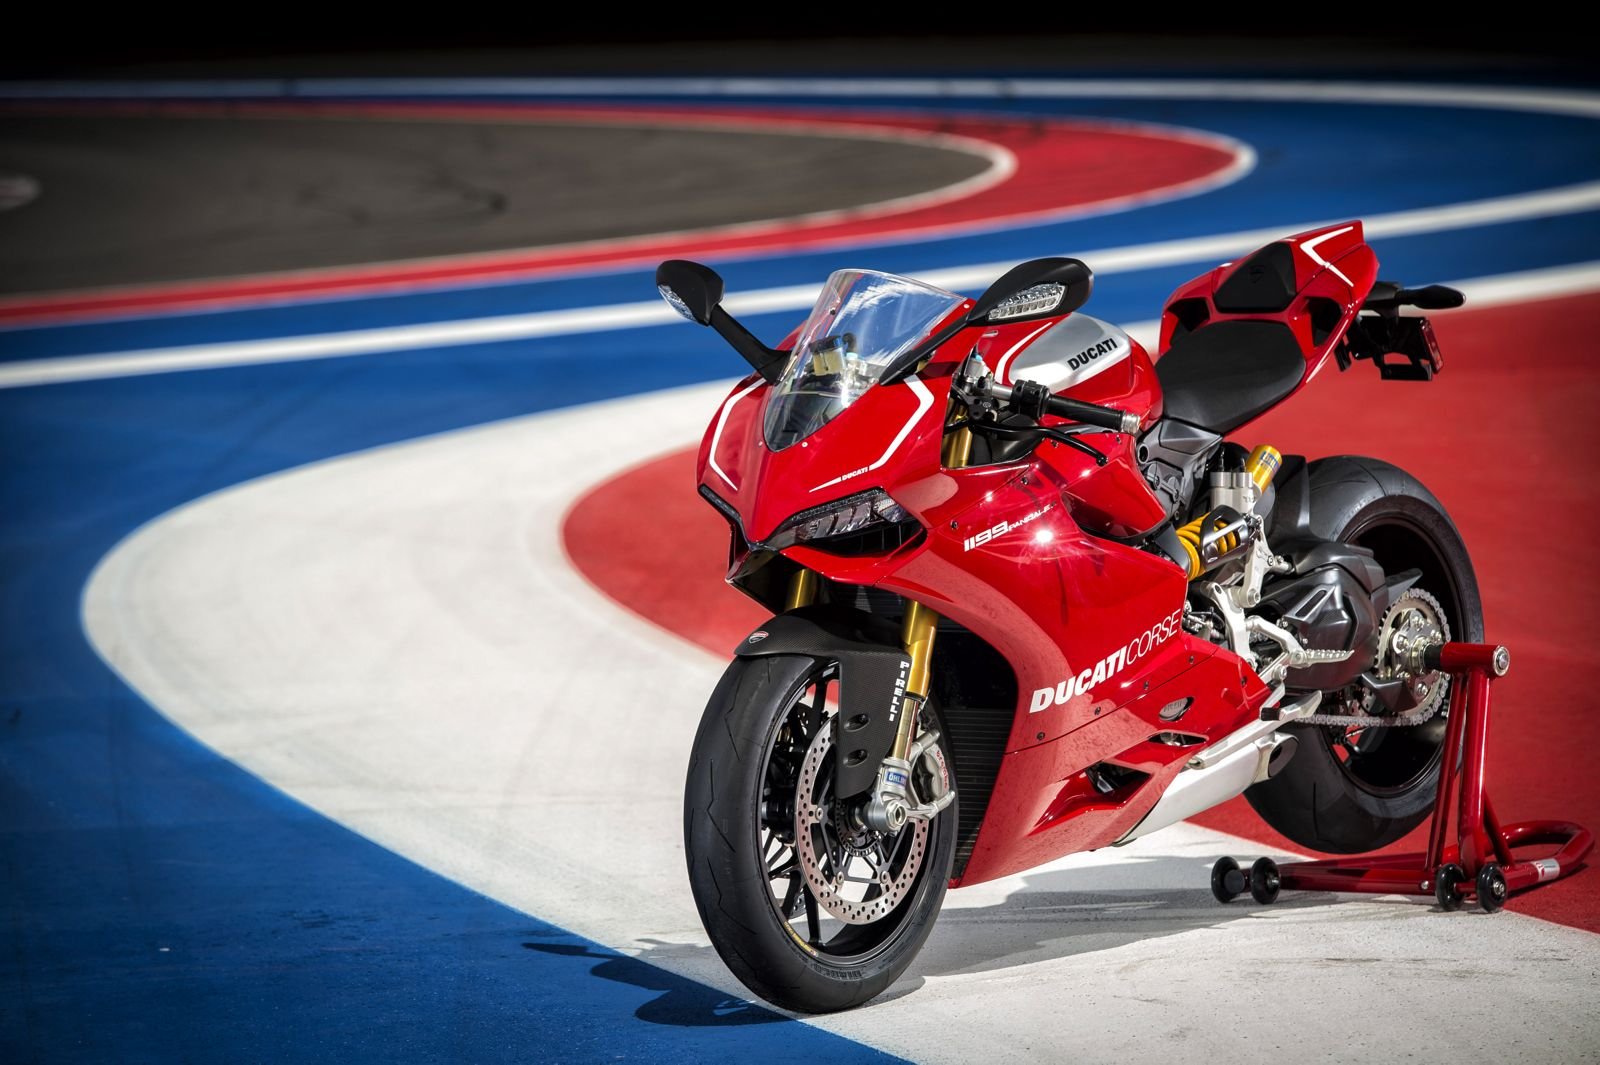 2013, Ducati, 1199, Panigale r, Motorcycles Wallpaper